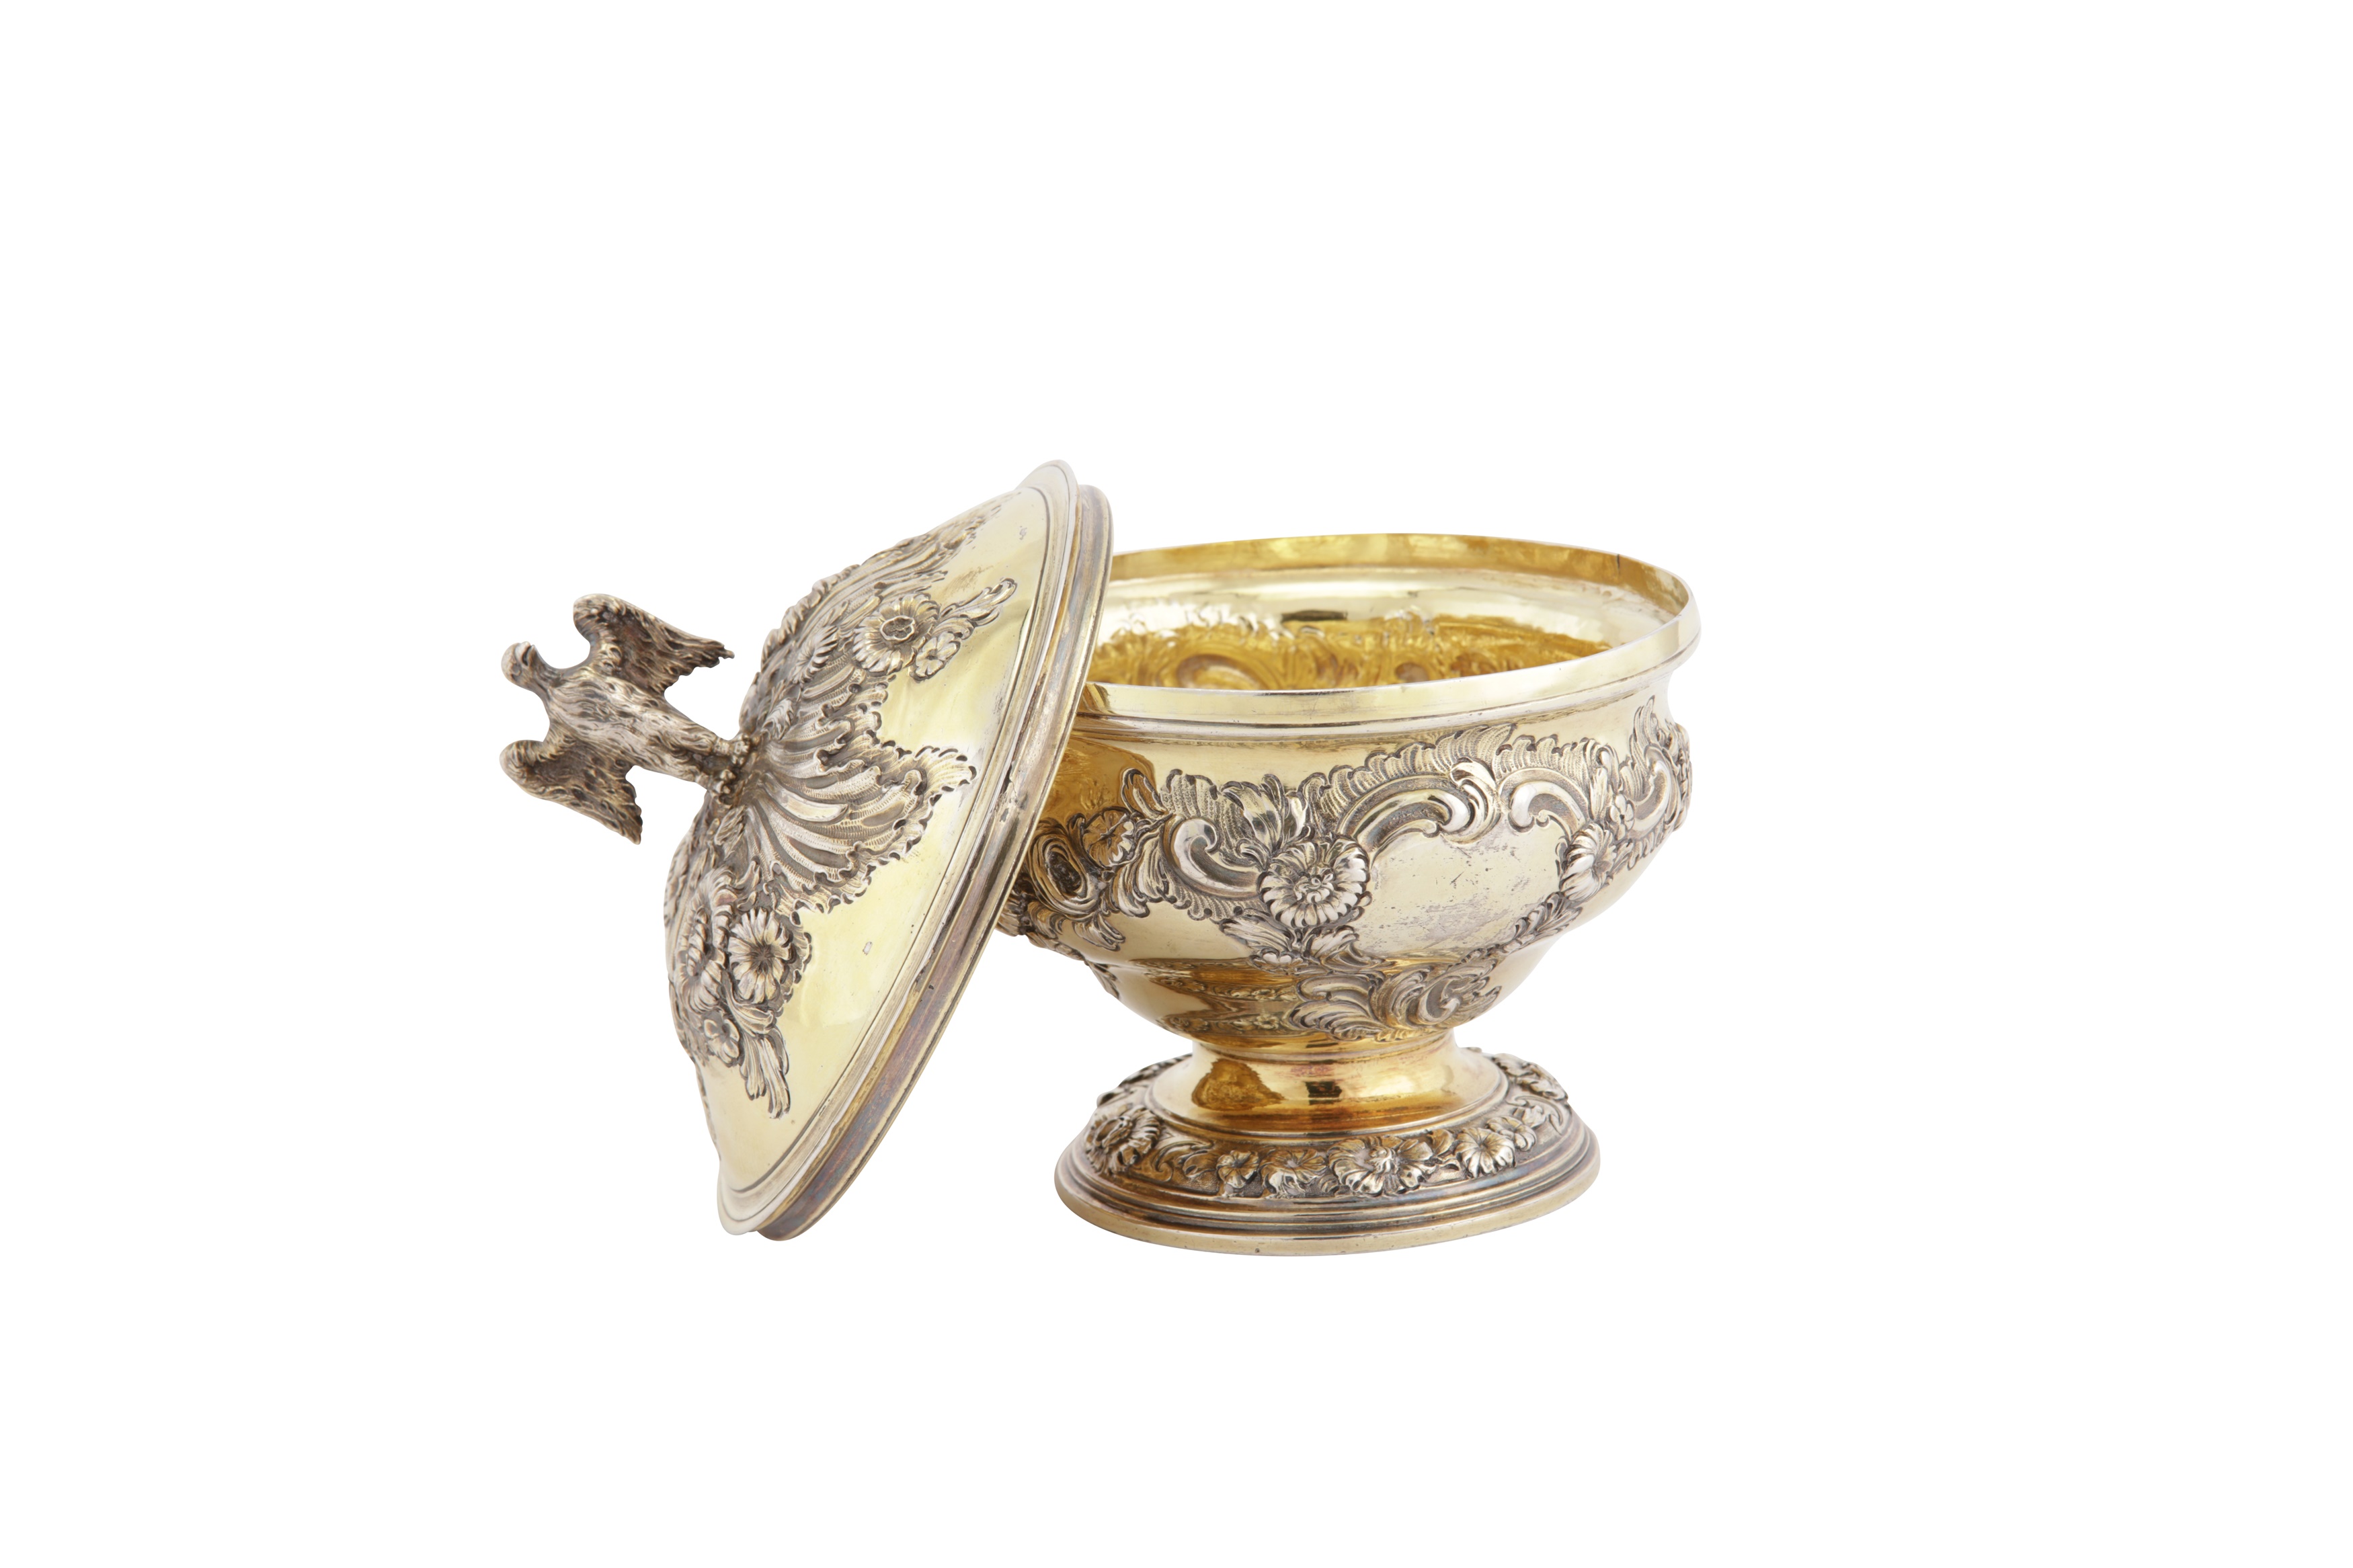 A George II sterling silver gilt covered sugar bowl or vase, London 1746 by Samuel Taylor (reg. 3rd - Image 2 of 5